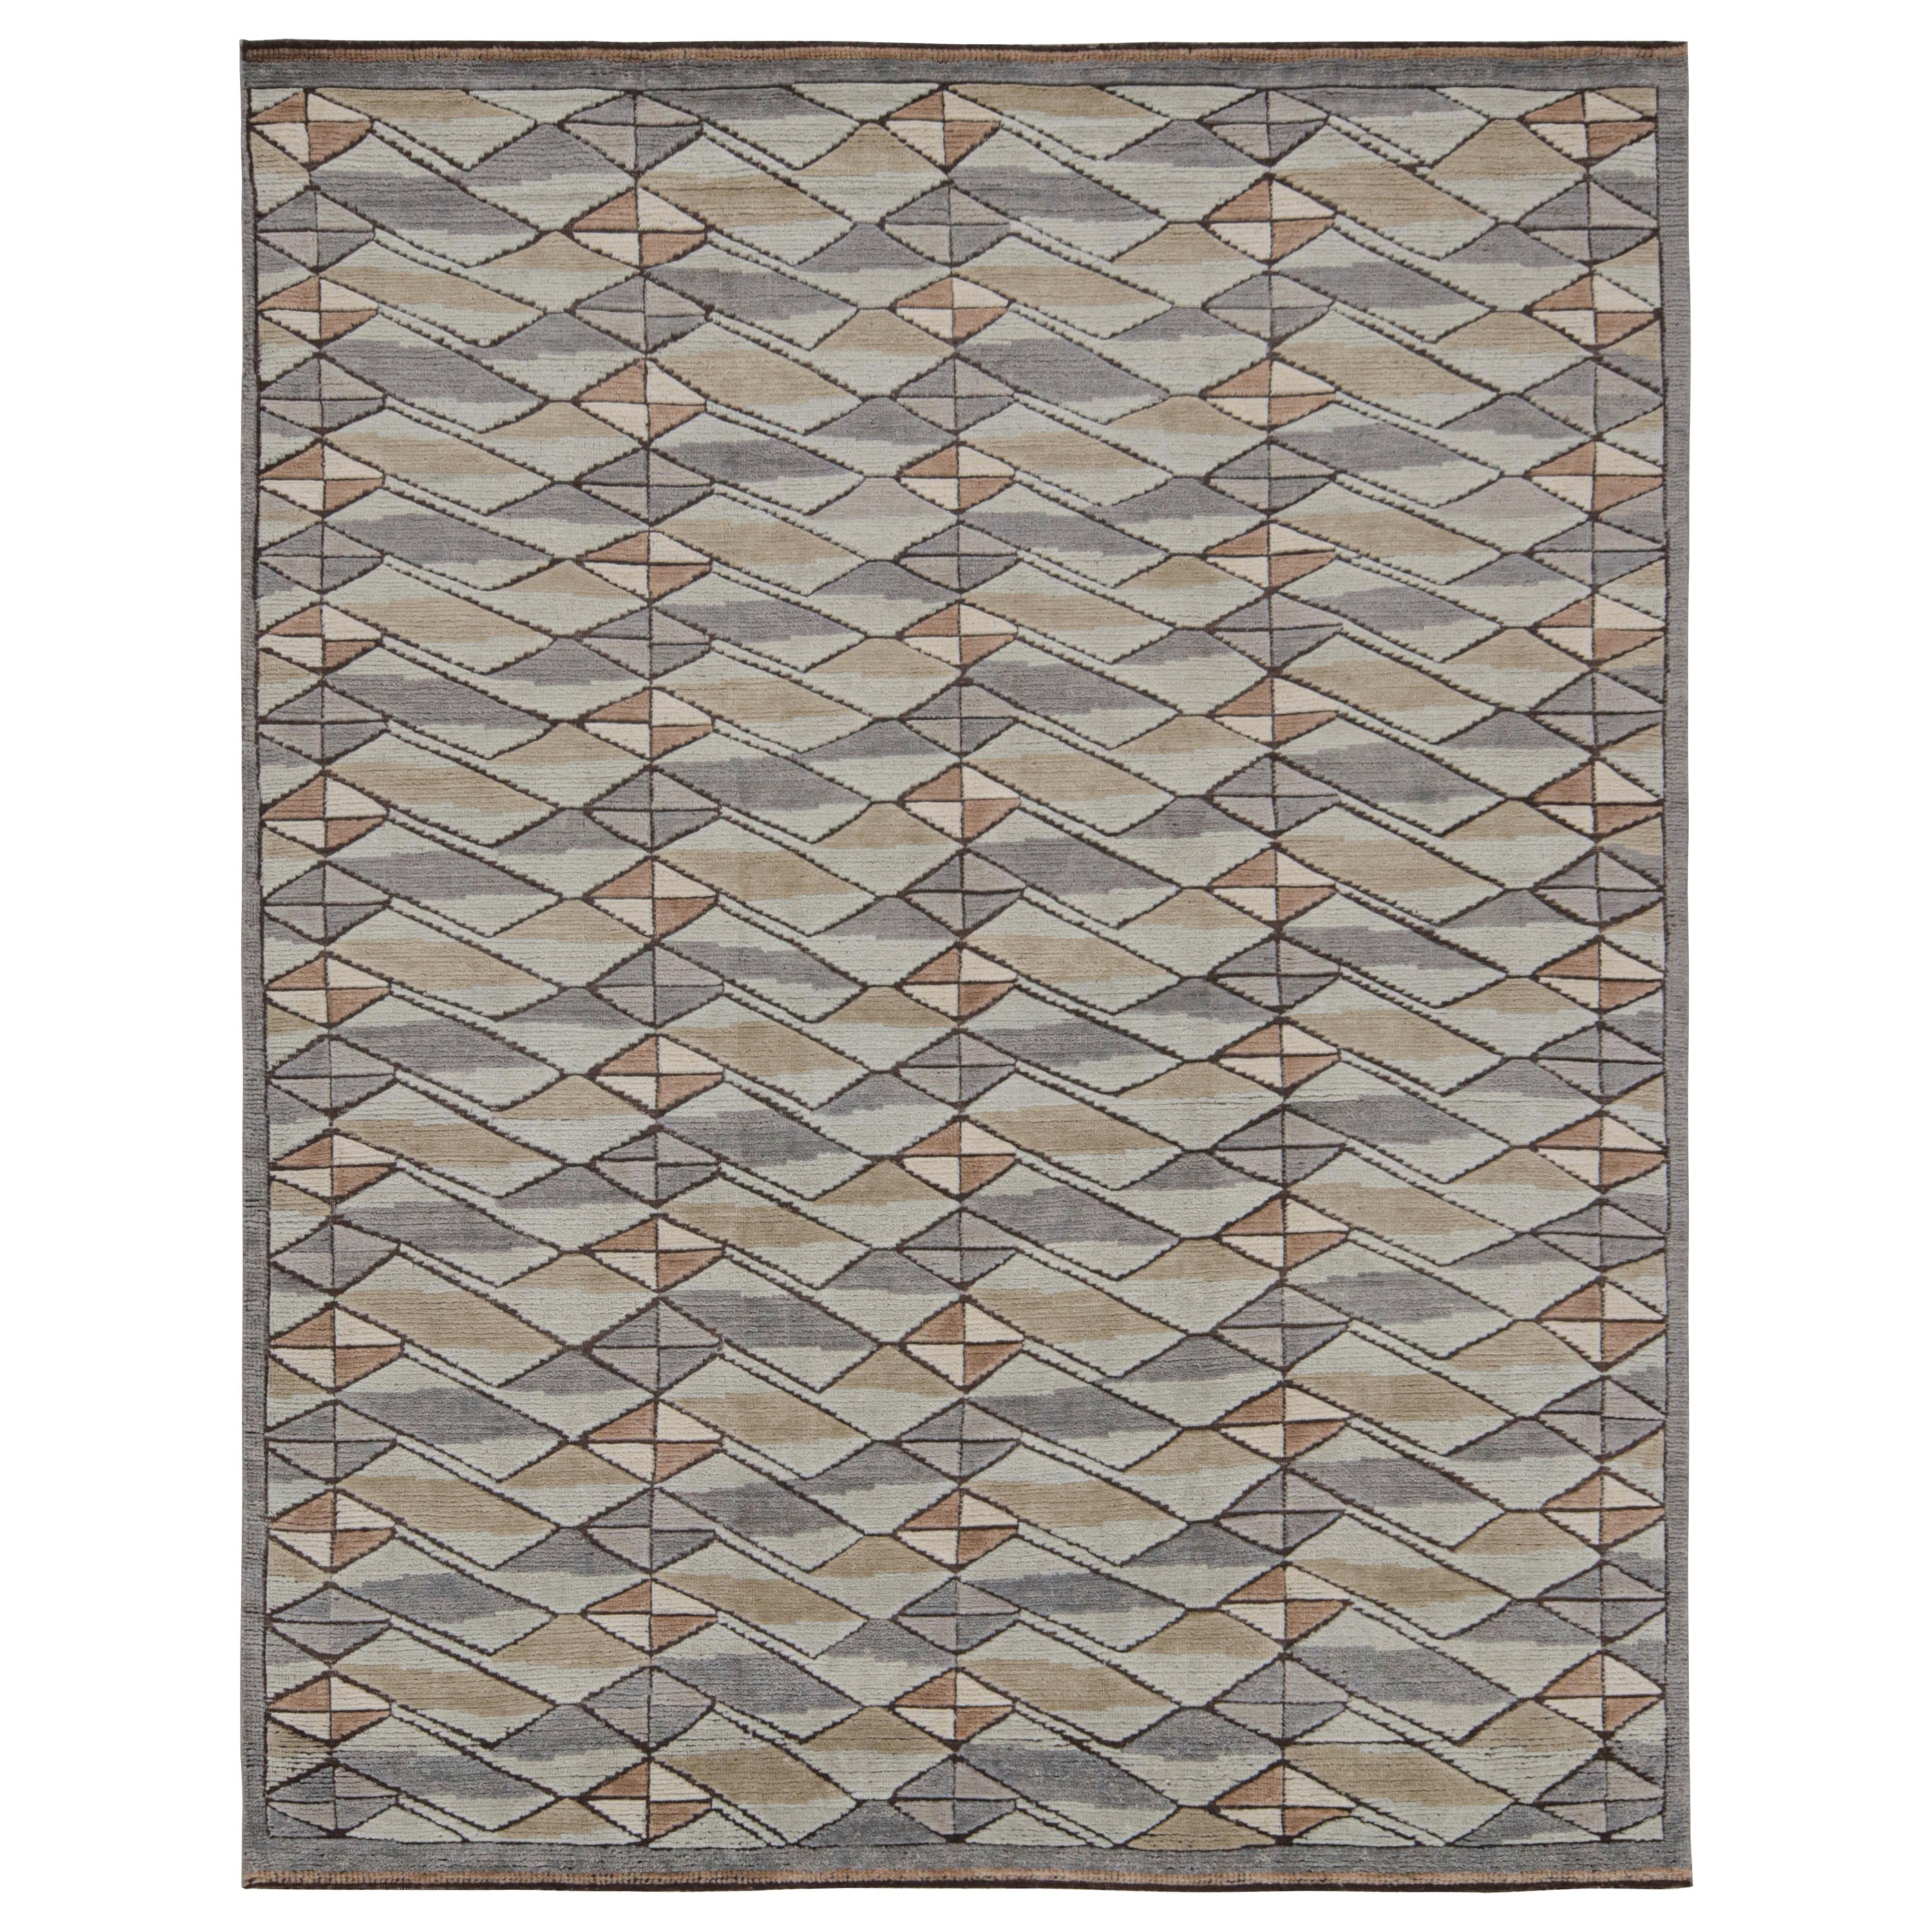 Rug & Kilim’s Scandinavian Style Rug in Beige-Brown and Gray Geometric Patterns For Sale